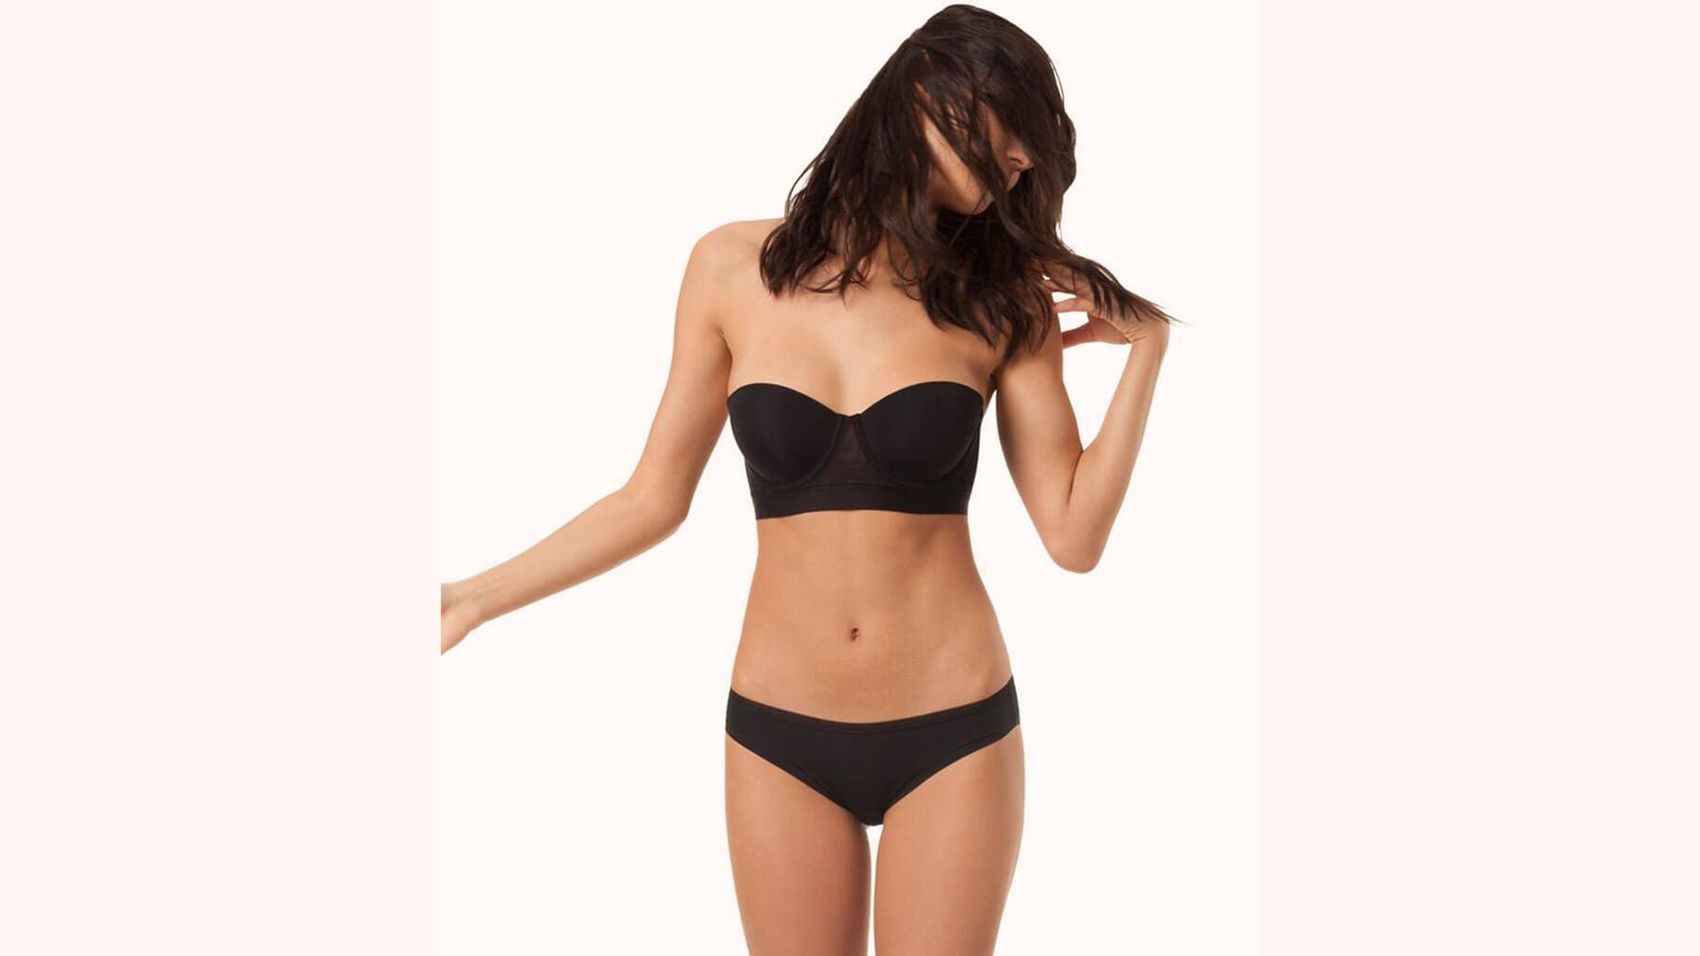 The Can't-Live-Without-It Bra, Meet the strapless bra to end all strapless  bras. Uniquely designed for small boobs after 2+ years of research, this bra  reliably stays up, lifts, and